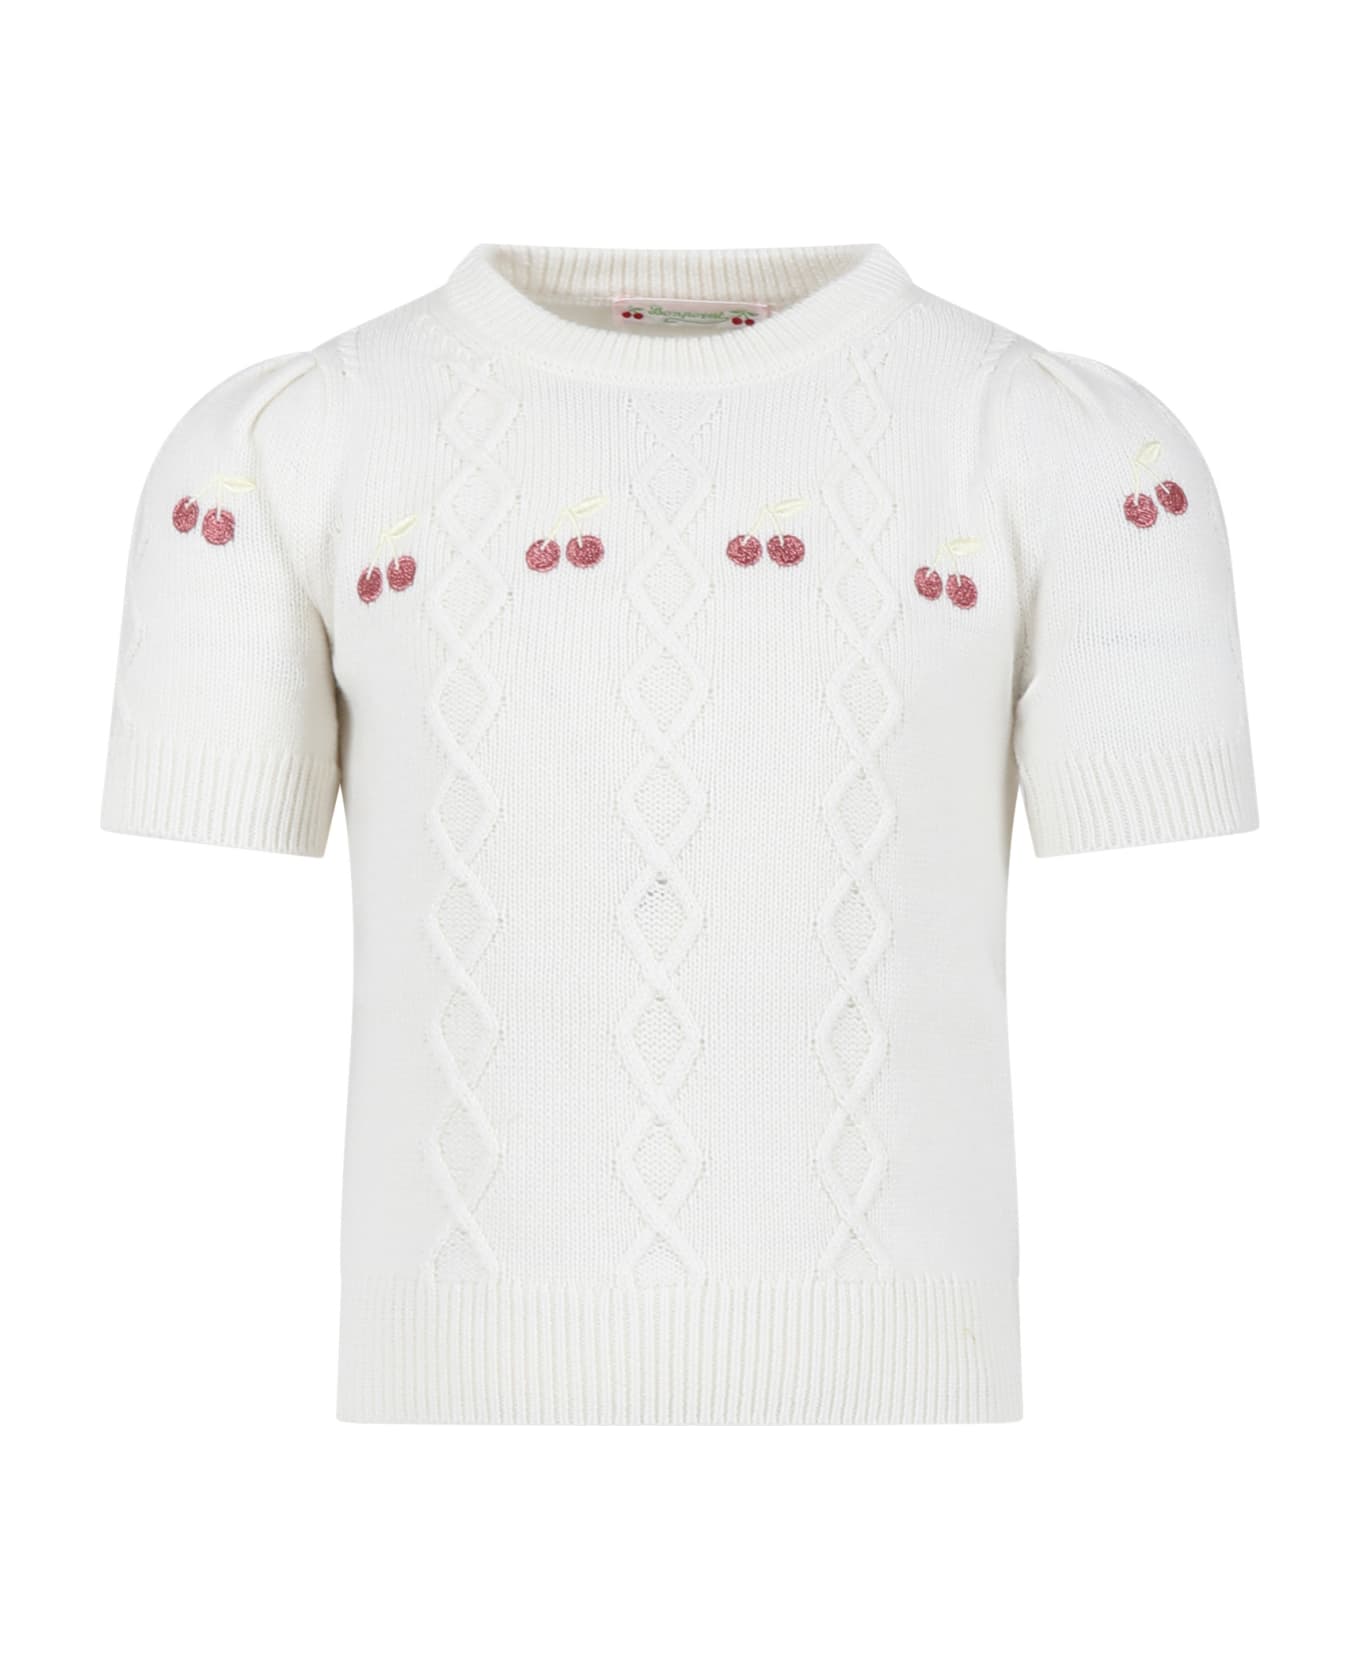 Bonpoint White Sweater For Girl With Cherries - White